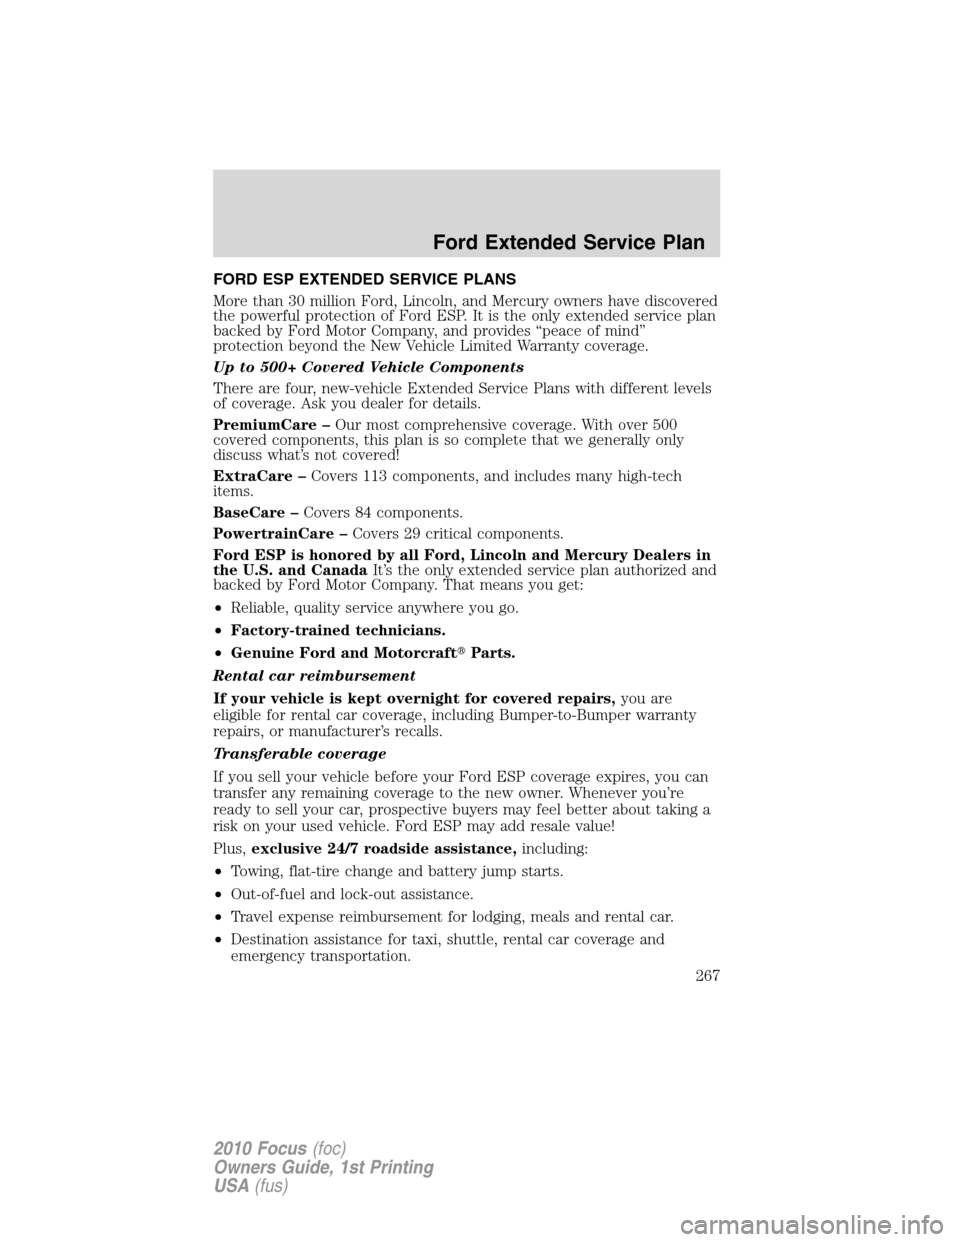 FORD FOCUS 2010 2.G Owners Manual FORD ESP EXTENDED SERVICE PLANS
More than 30 million Ford, Lincoln, and Mercury owners have discovered
the powerful protection of Ford ESP. It is the only extended service plan
backed by Ford Motor Co